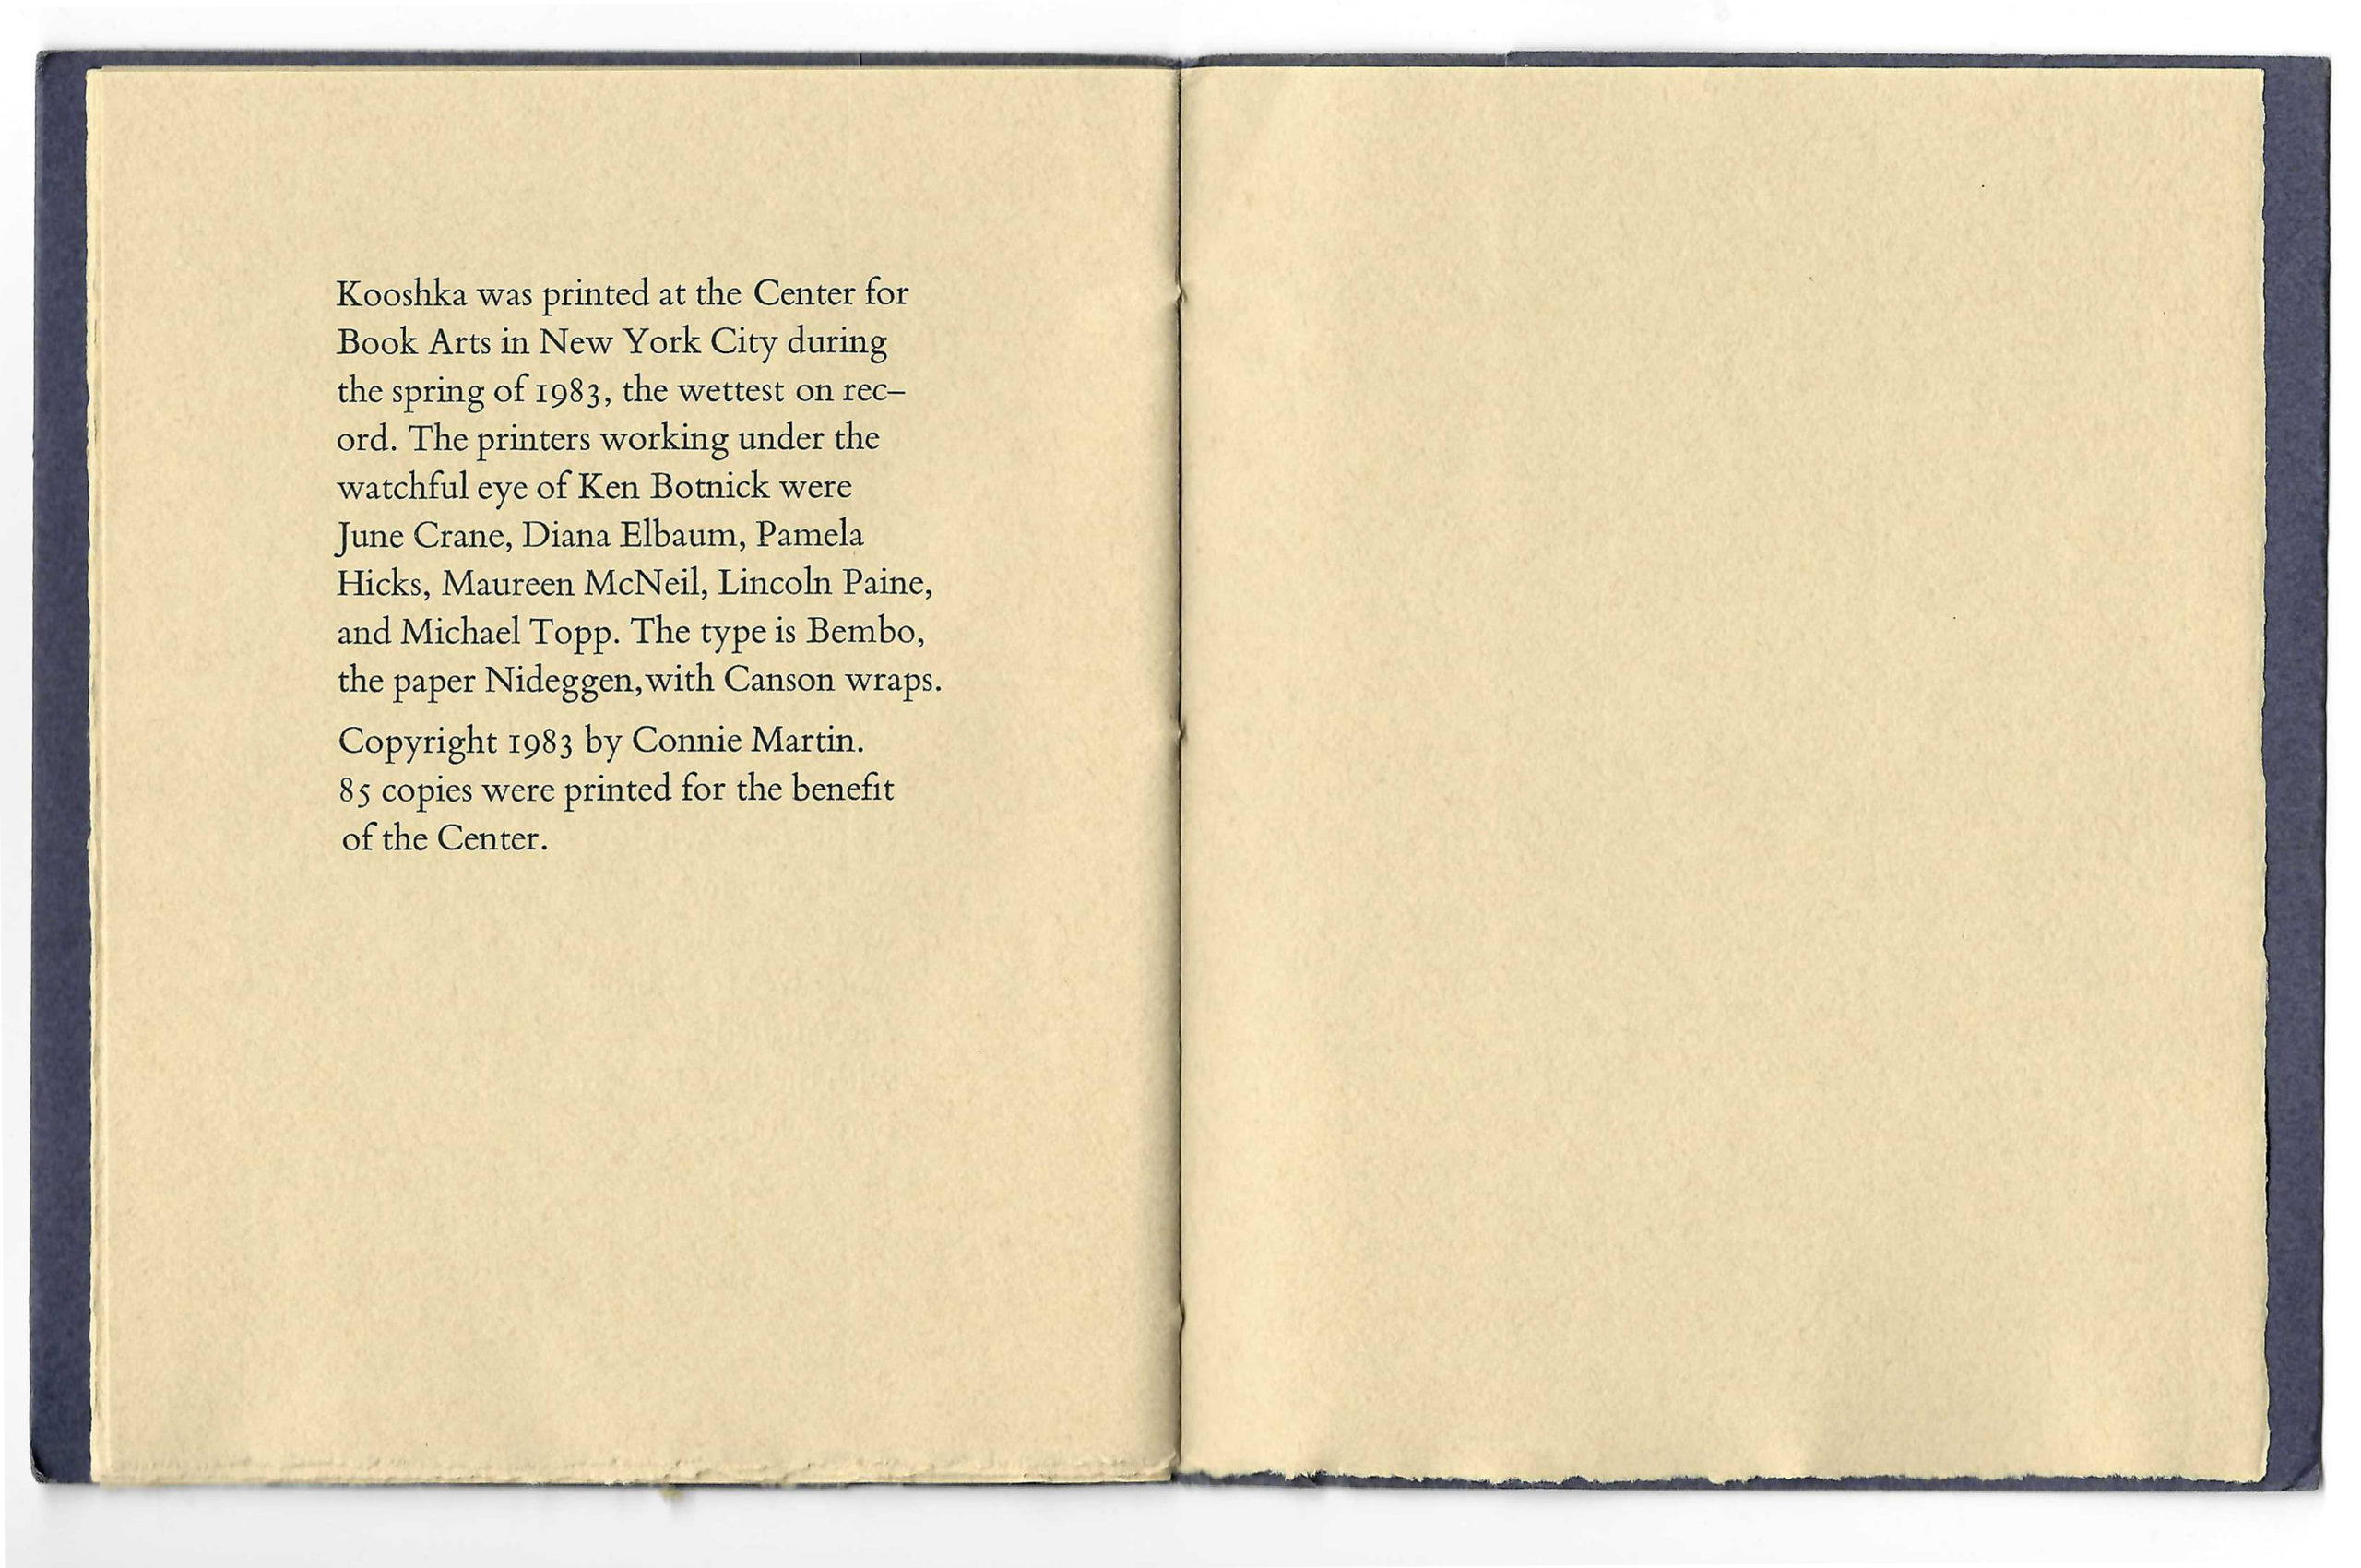 Kooshka and his lover (colophon) Connie Martin